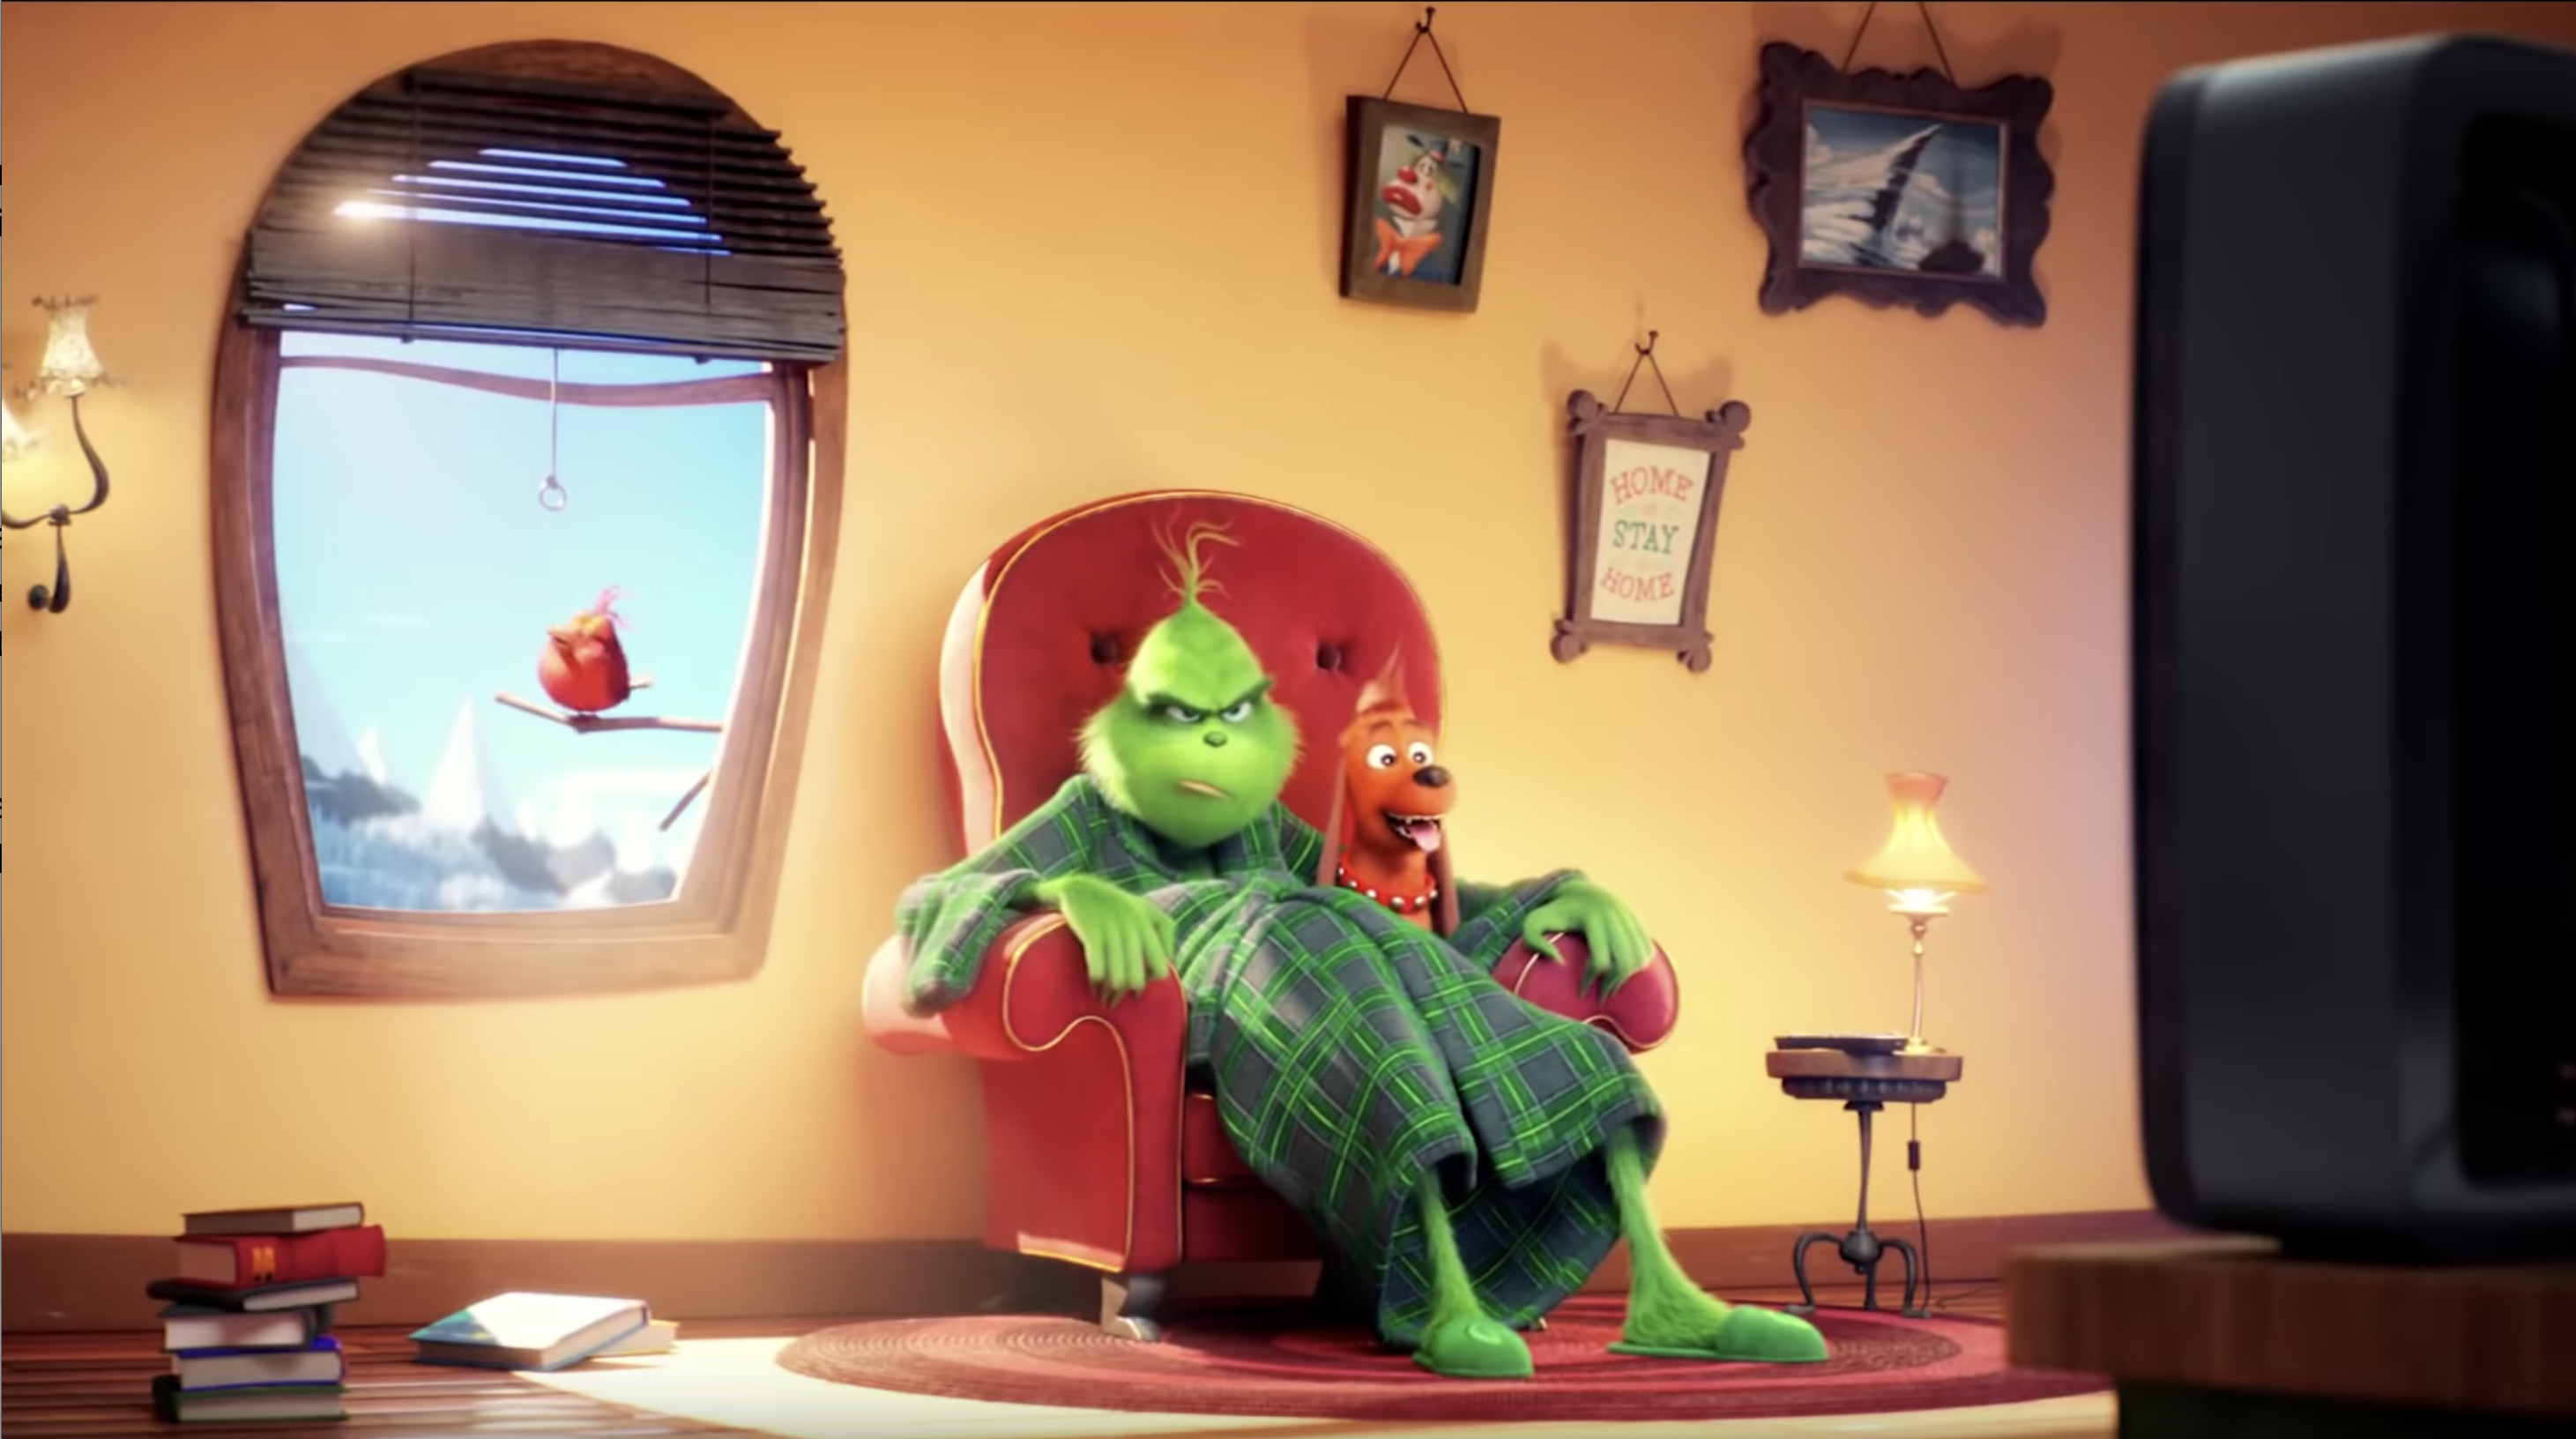 The Grinch lounges on a chair looking grouchy